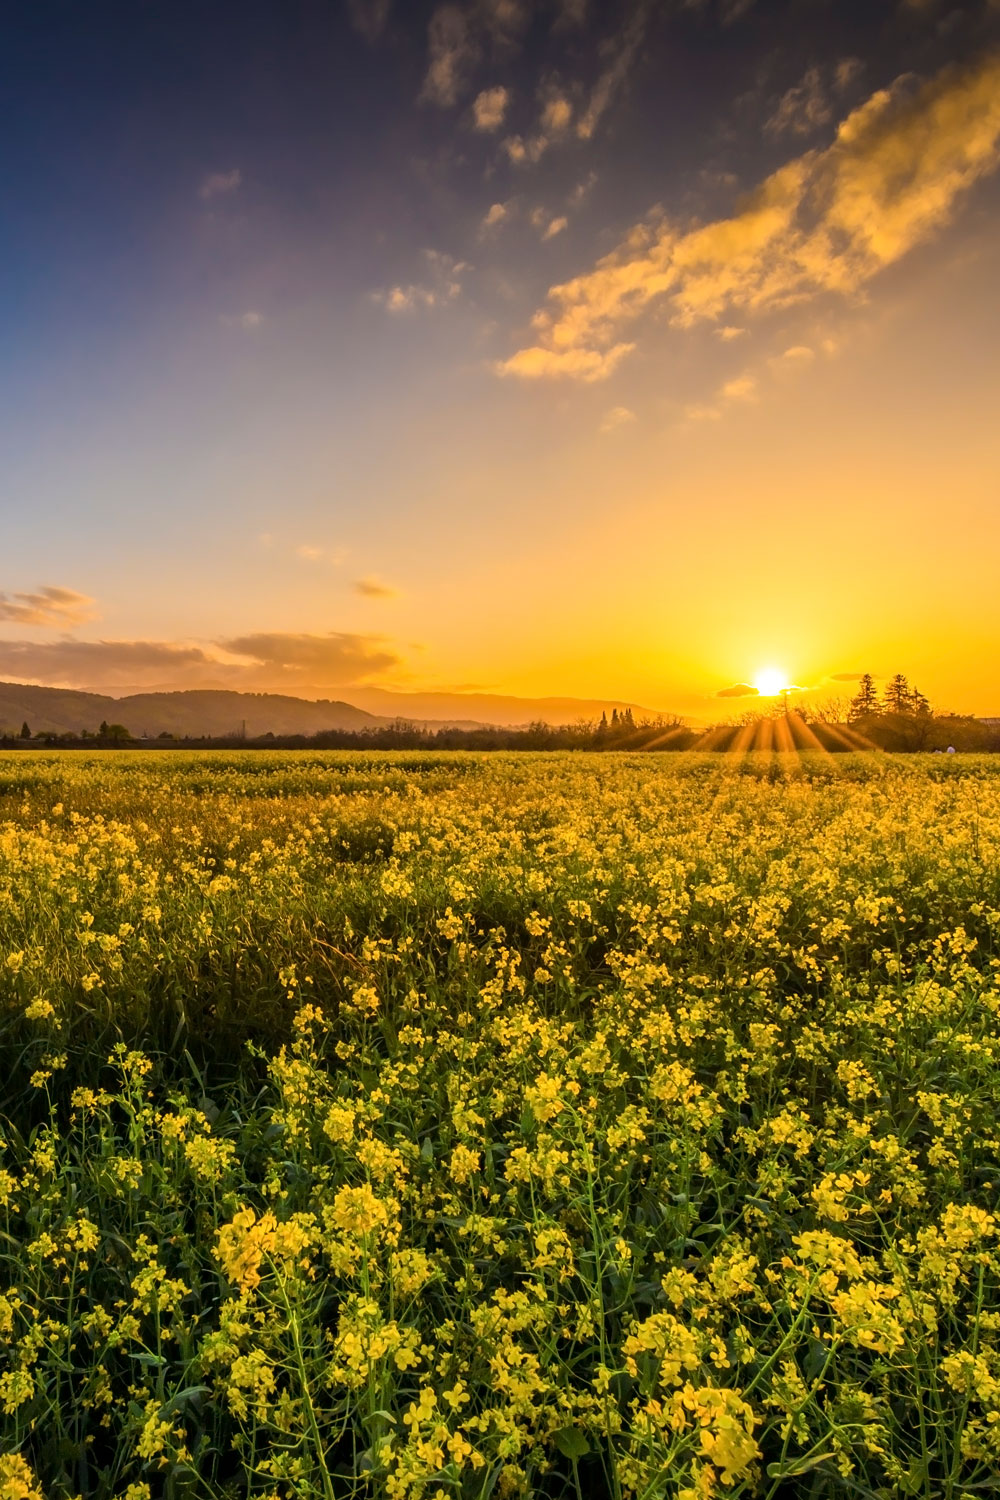 photo - California field of flowers at sunset